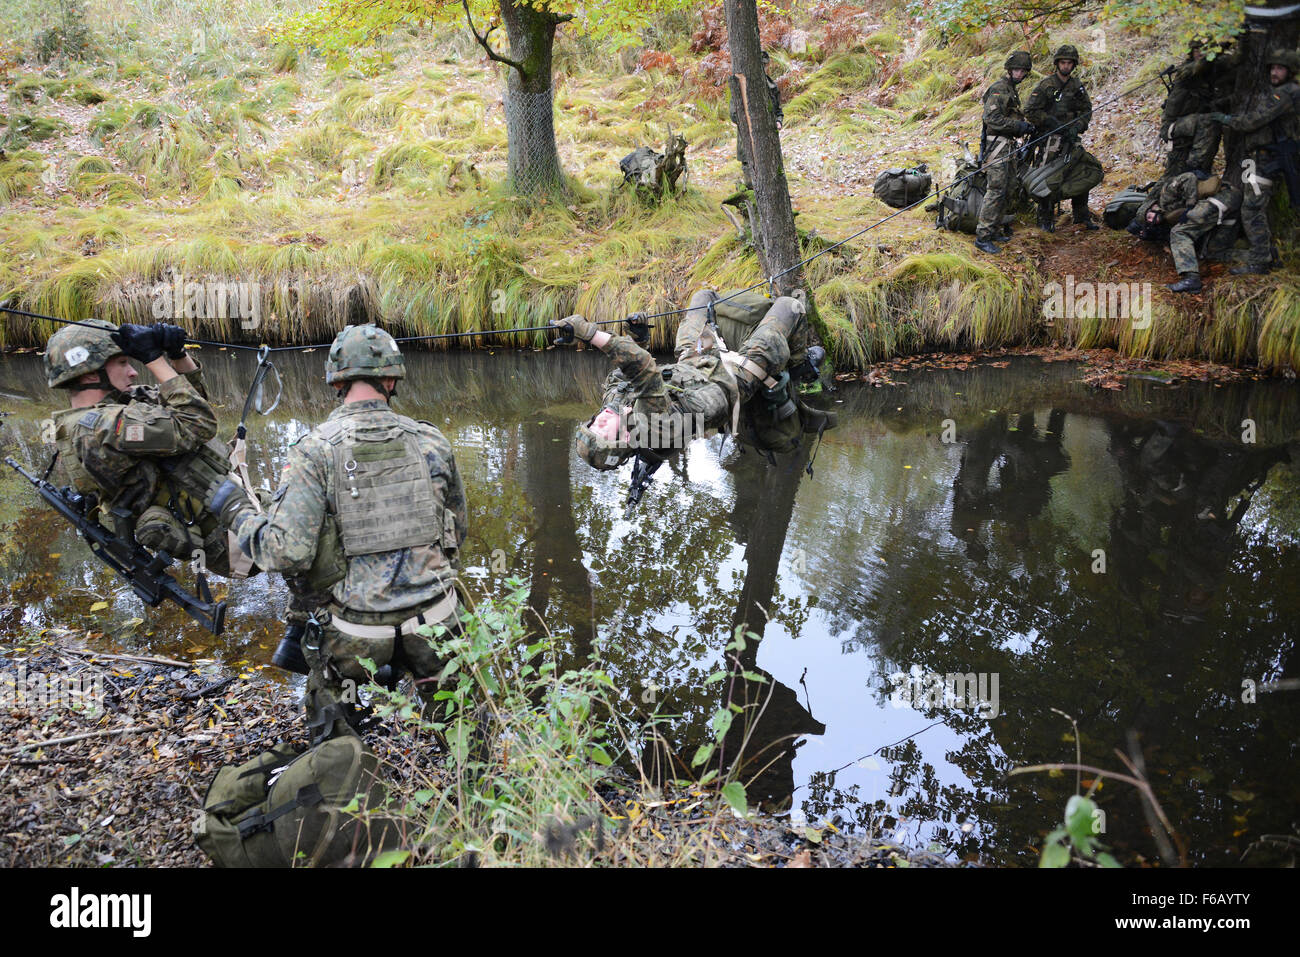 German soldiers conduct the Rope Bridge Water Crossing lane during the European Best Squad Competition at the 7th Army Joint Multinational Training Command’s Grafenwoehr training area, Bavaria, Germany, Oct. 21, 2015. The European Best Squad Competition is an Army Europe competition challenging militaries from across Europe to compete and enhance teamwork with Allies and partner nations.  (U.S. Army photo by Visual Information Specialist Gertrud Zach/released) Stock Photo